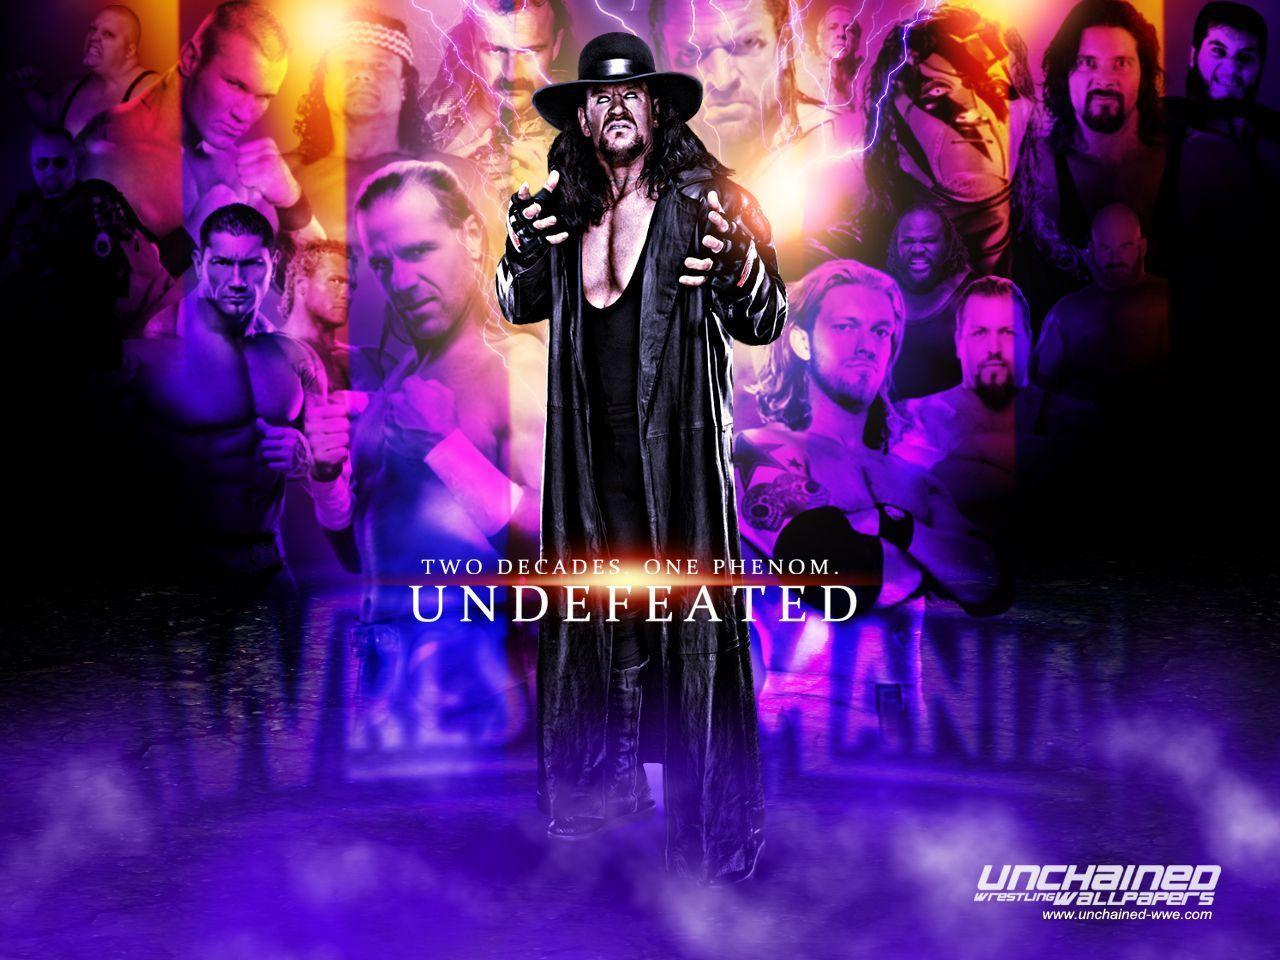 WWE The Undertaker "Undefeated" Wallpaper Unchained WWE.com